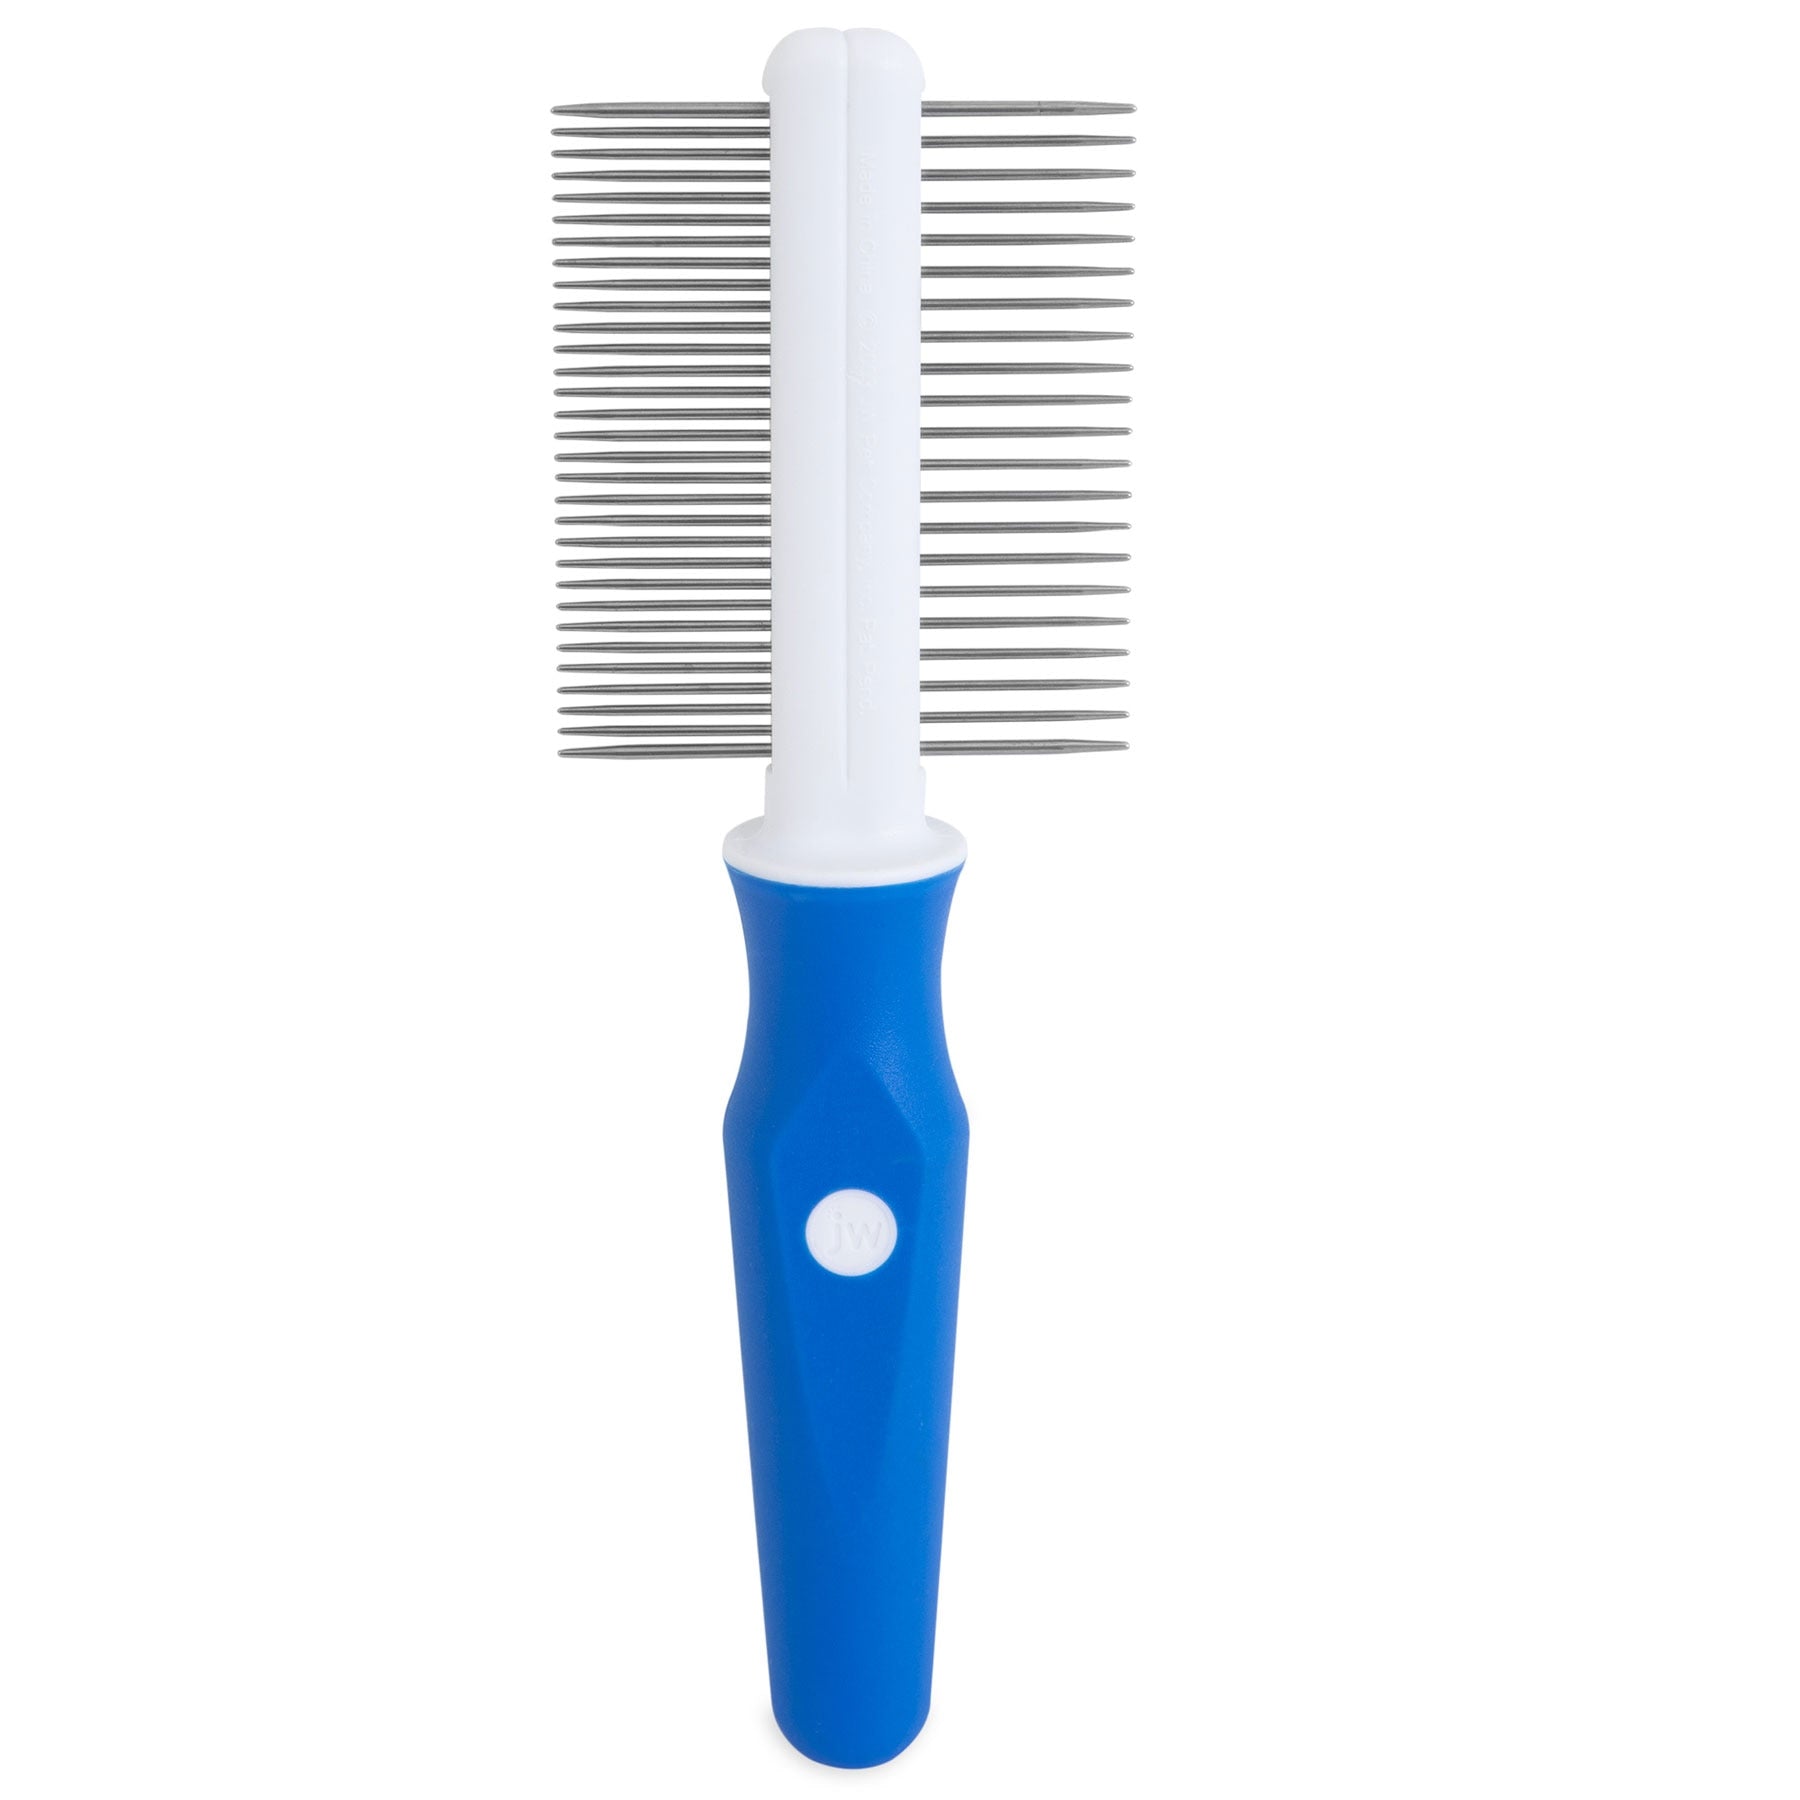 JW Gripsoft Double Sided Comb. SKUS: 65030